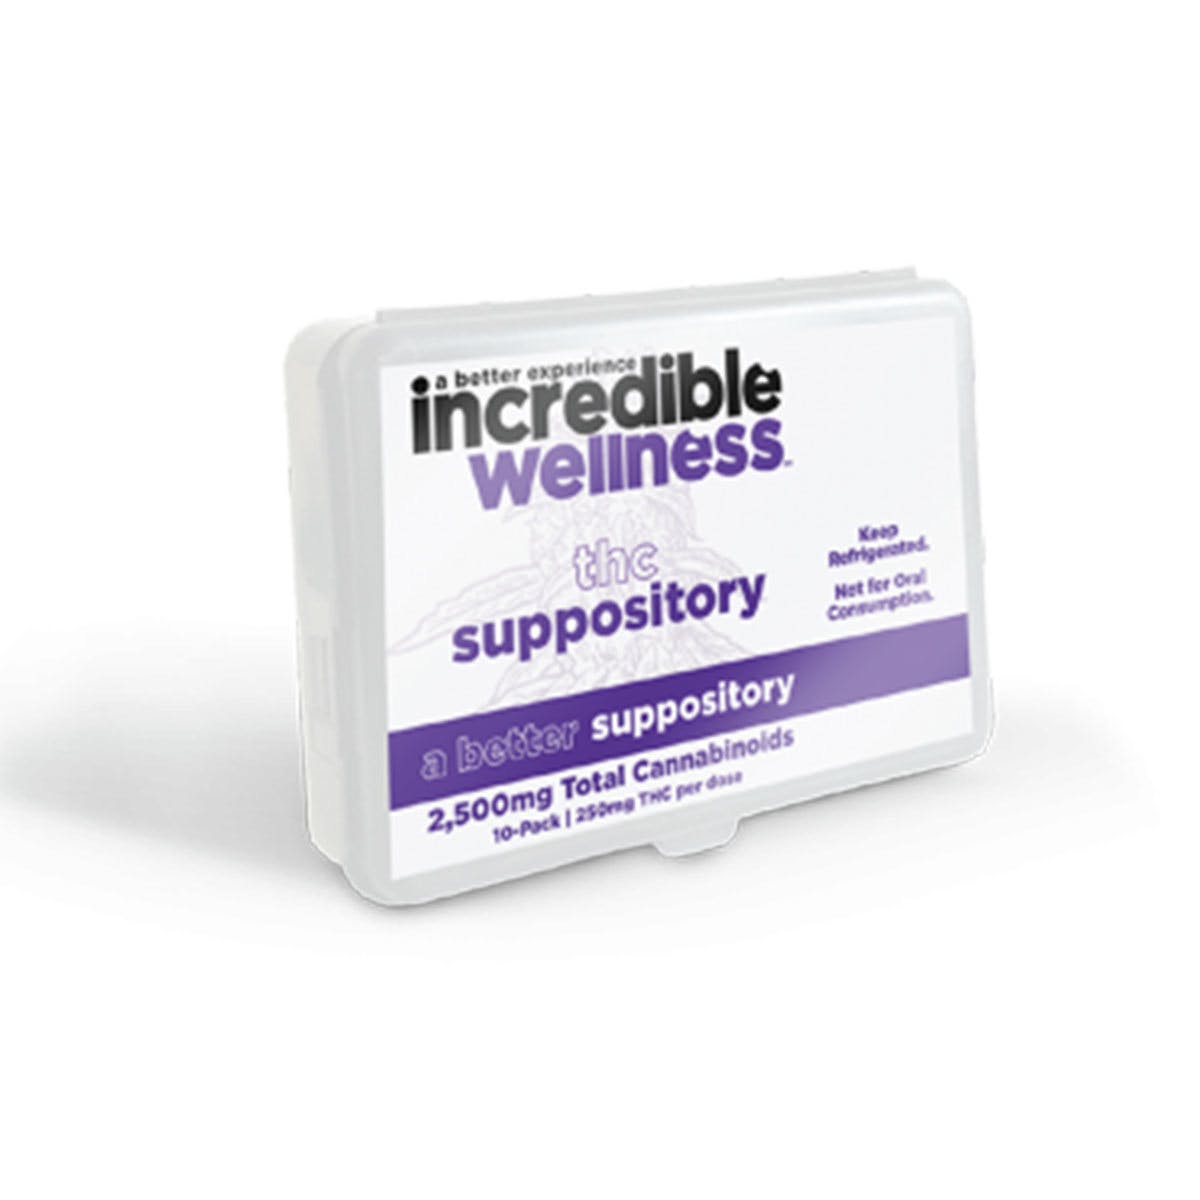 topicals-incredible-wellness-thc-suppository-2500mg-med